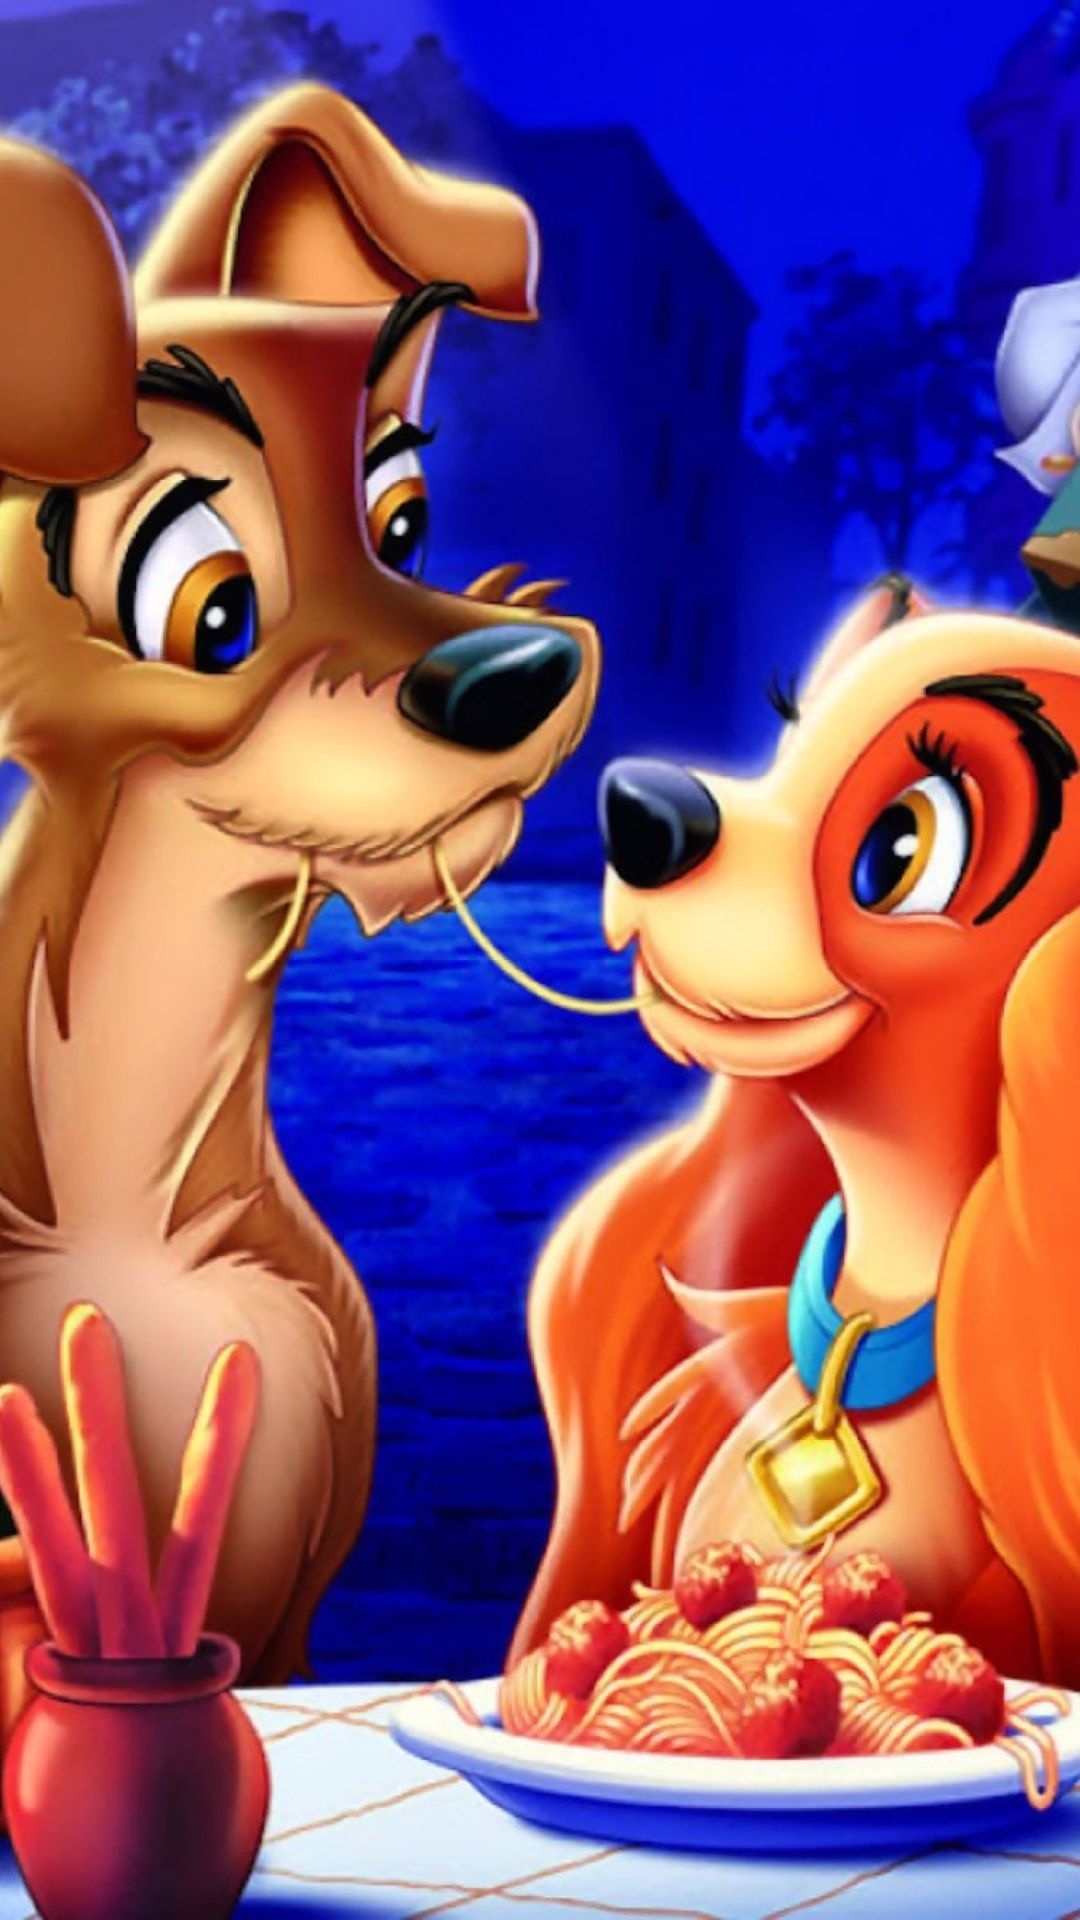 Lady and the Tramp, Animated film, Wallpapers, 1080x1920 Full HD Phone